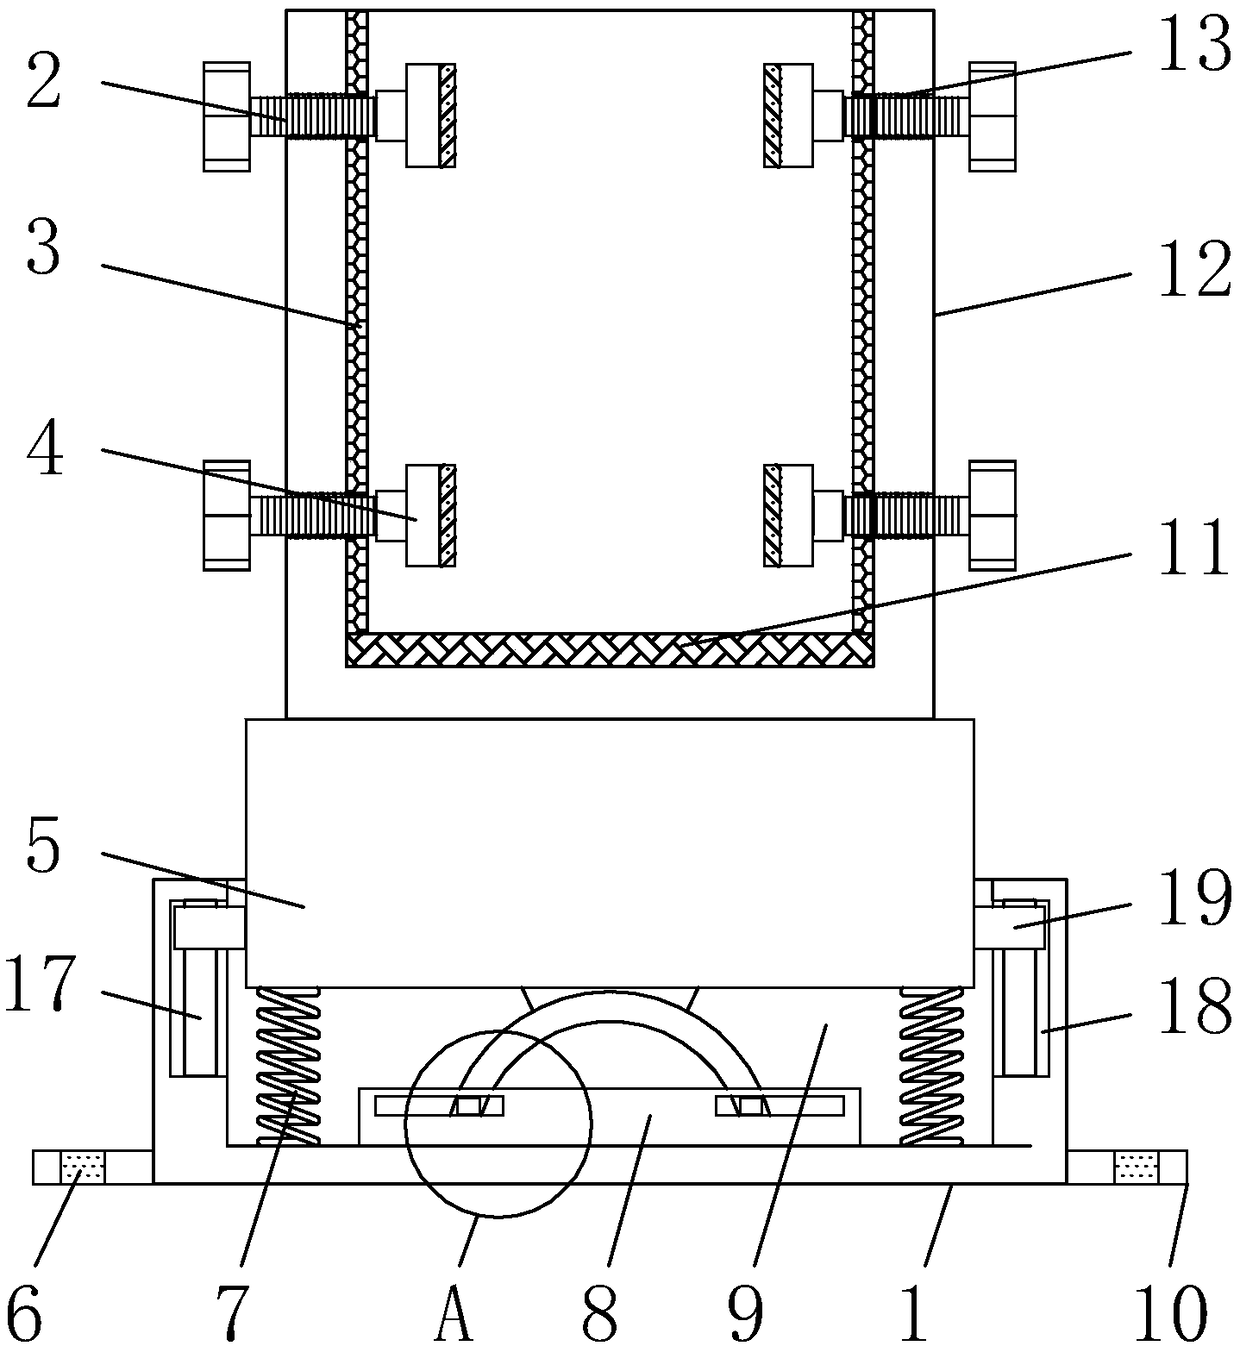 Shock isolation device of building equipment